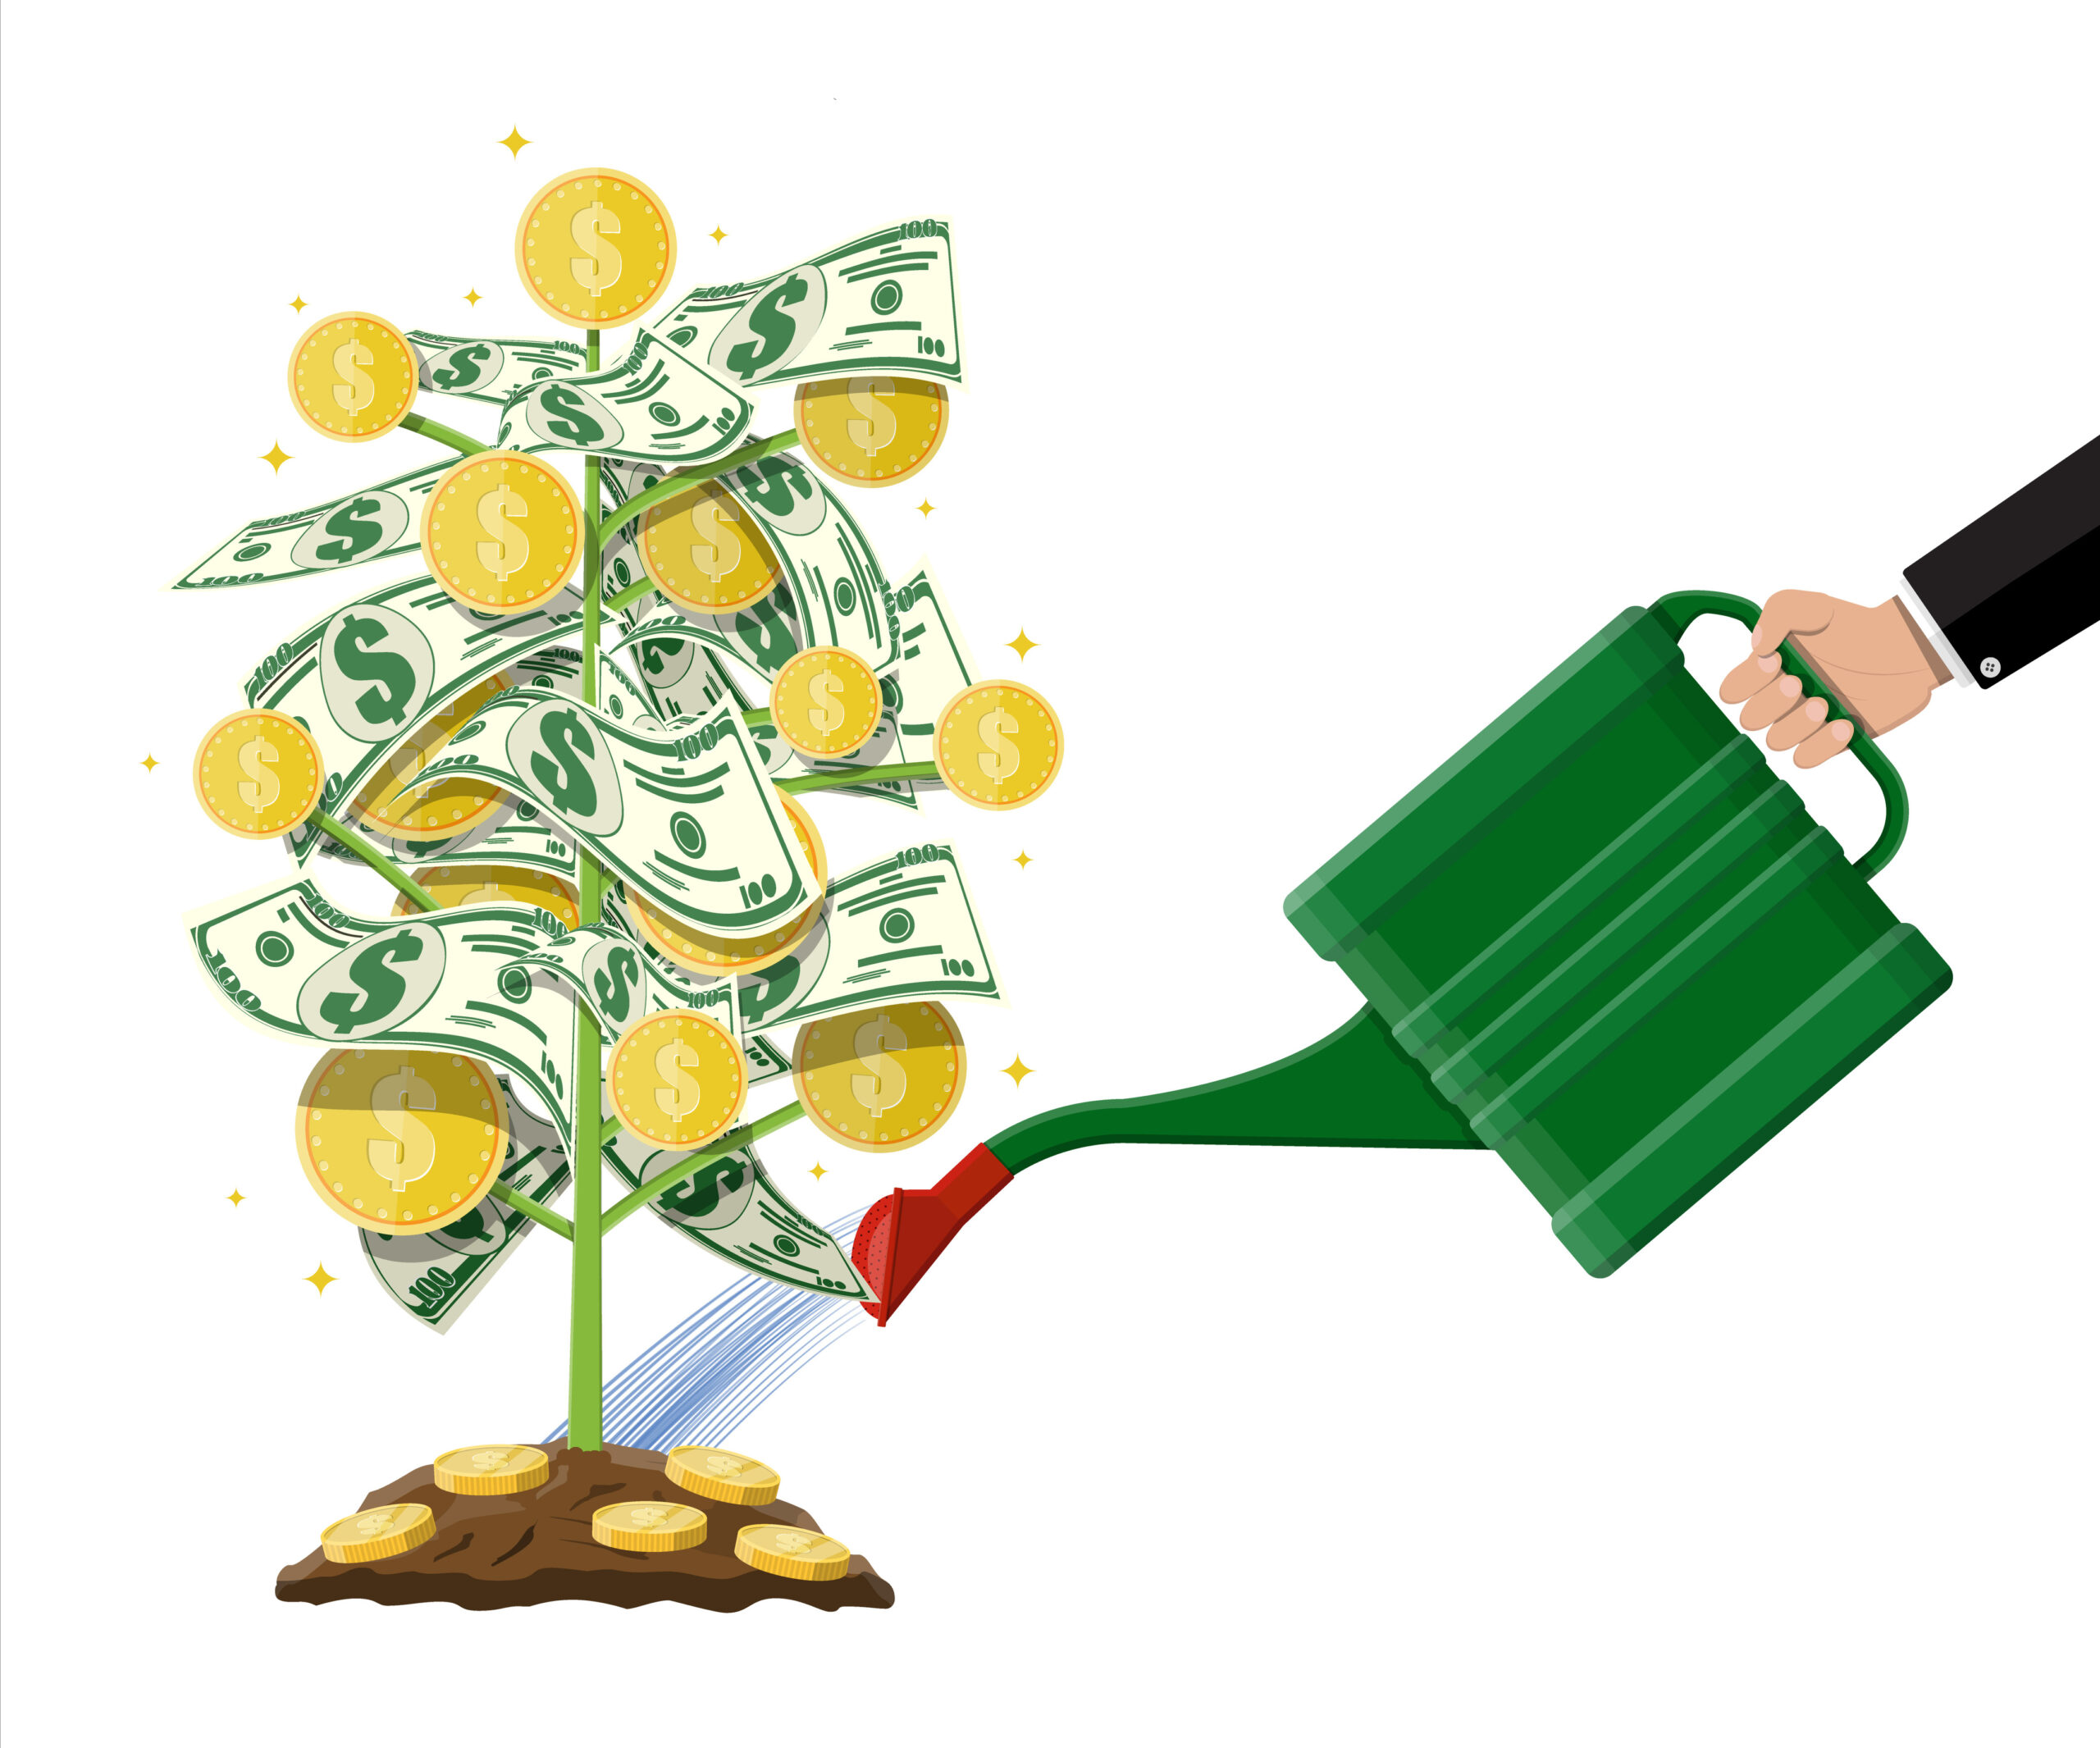 Watering money coin tree with can. Growing money tree. Investment, investing. Gold coins and dollar banknotes on branches. Symbol of wealth. Business success. Flat style vector illustration.